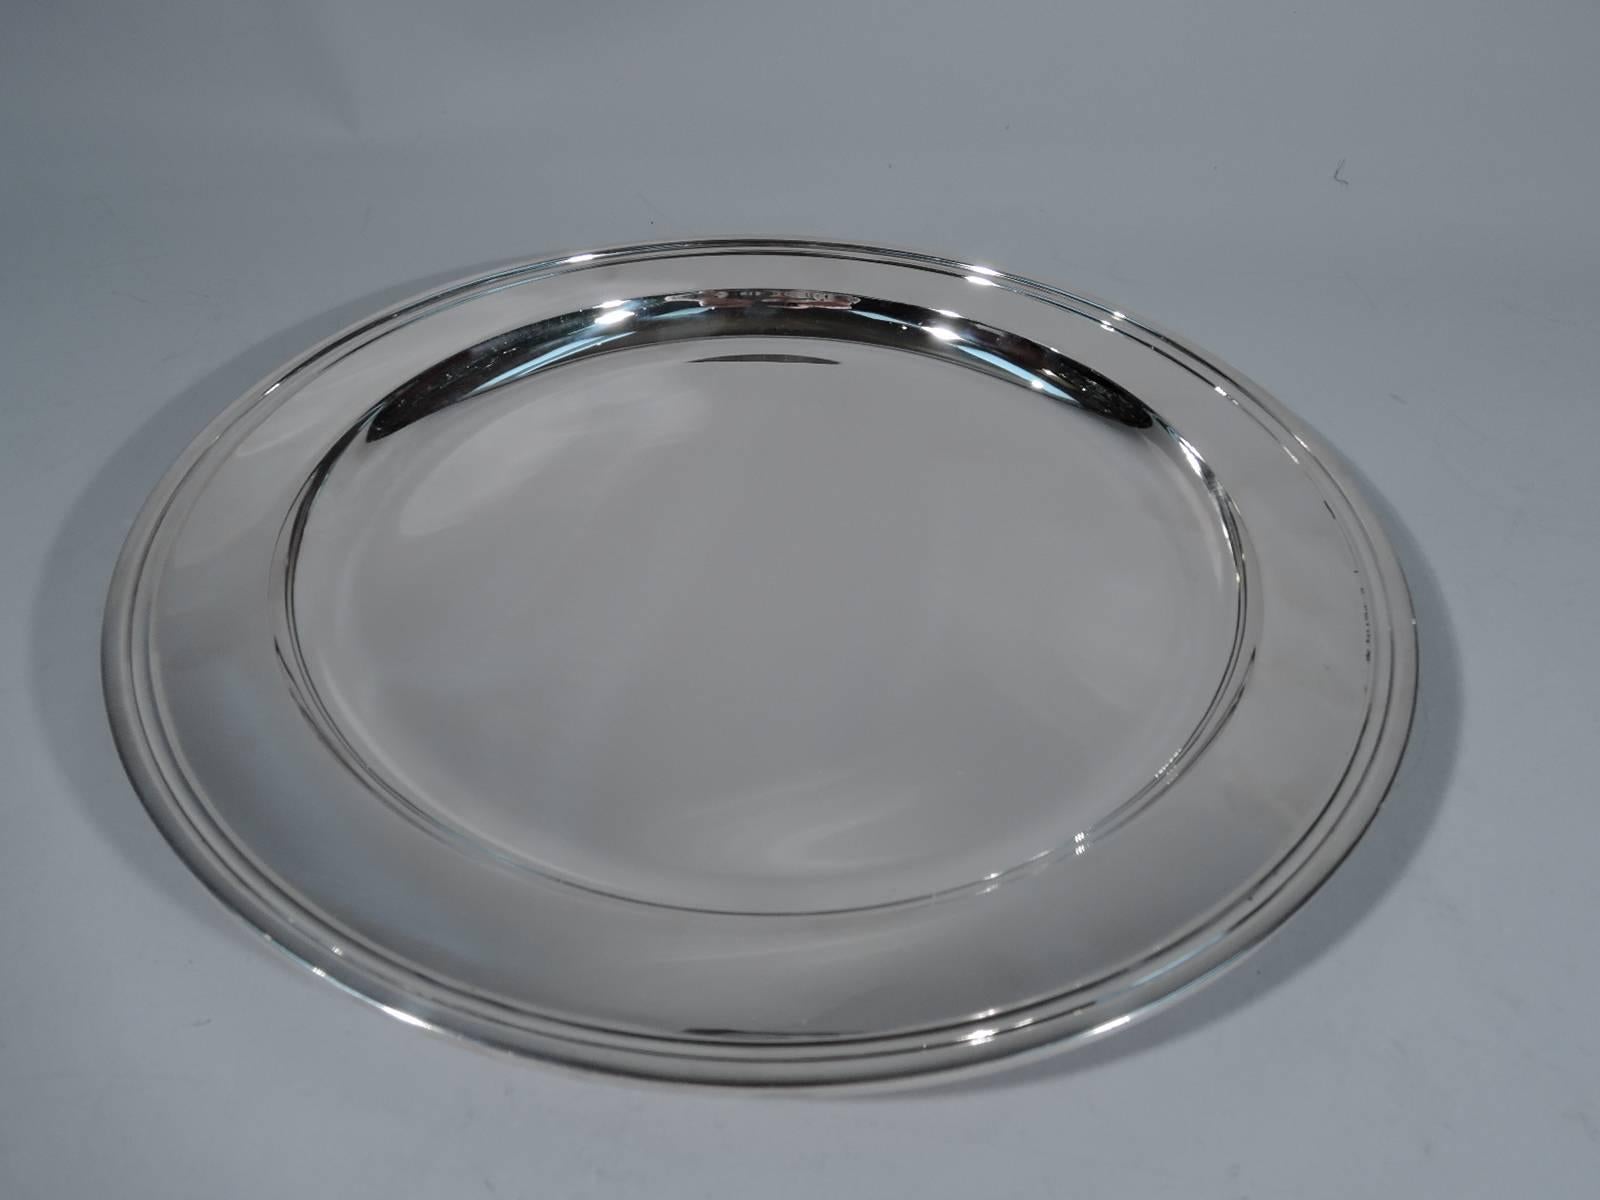 Deep and heavy sterling silver tray. Made by Tiffany & Co. in New York. Circular with applied and deep well. The pattern (no. 20188) was first produced in 1923. Hallmark includes director's letter M (1947-56). Excellent condition.

Dimensions: